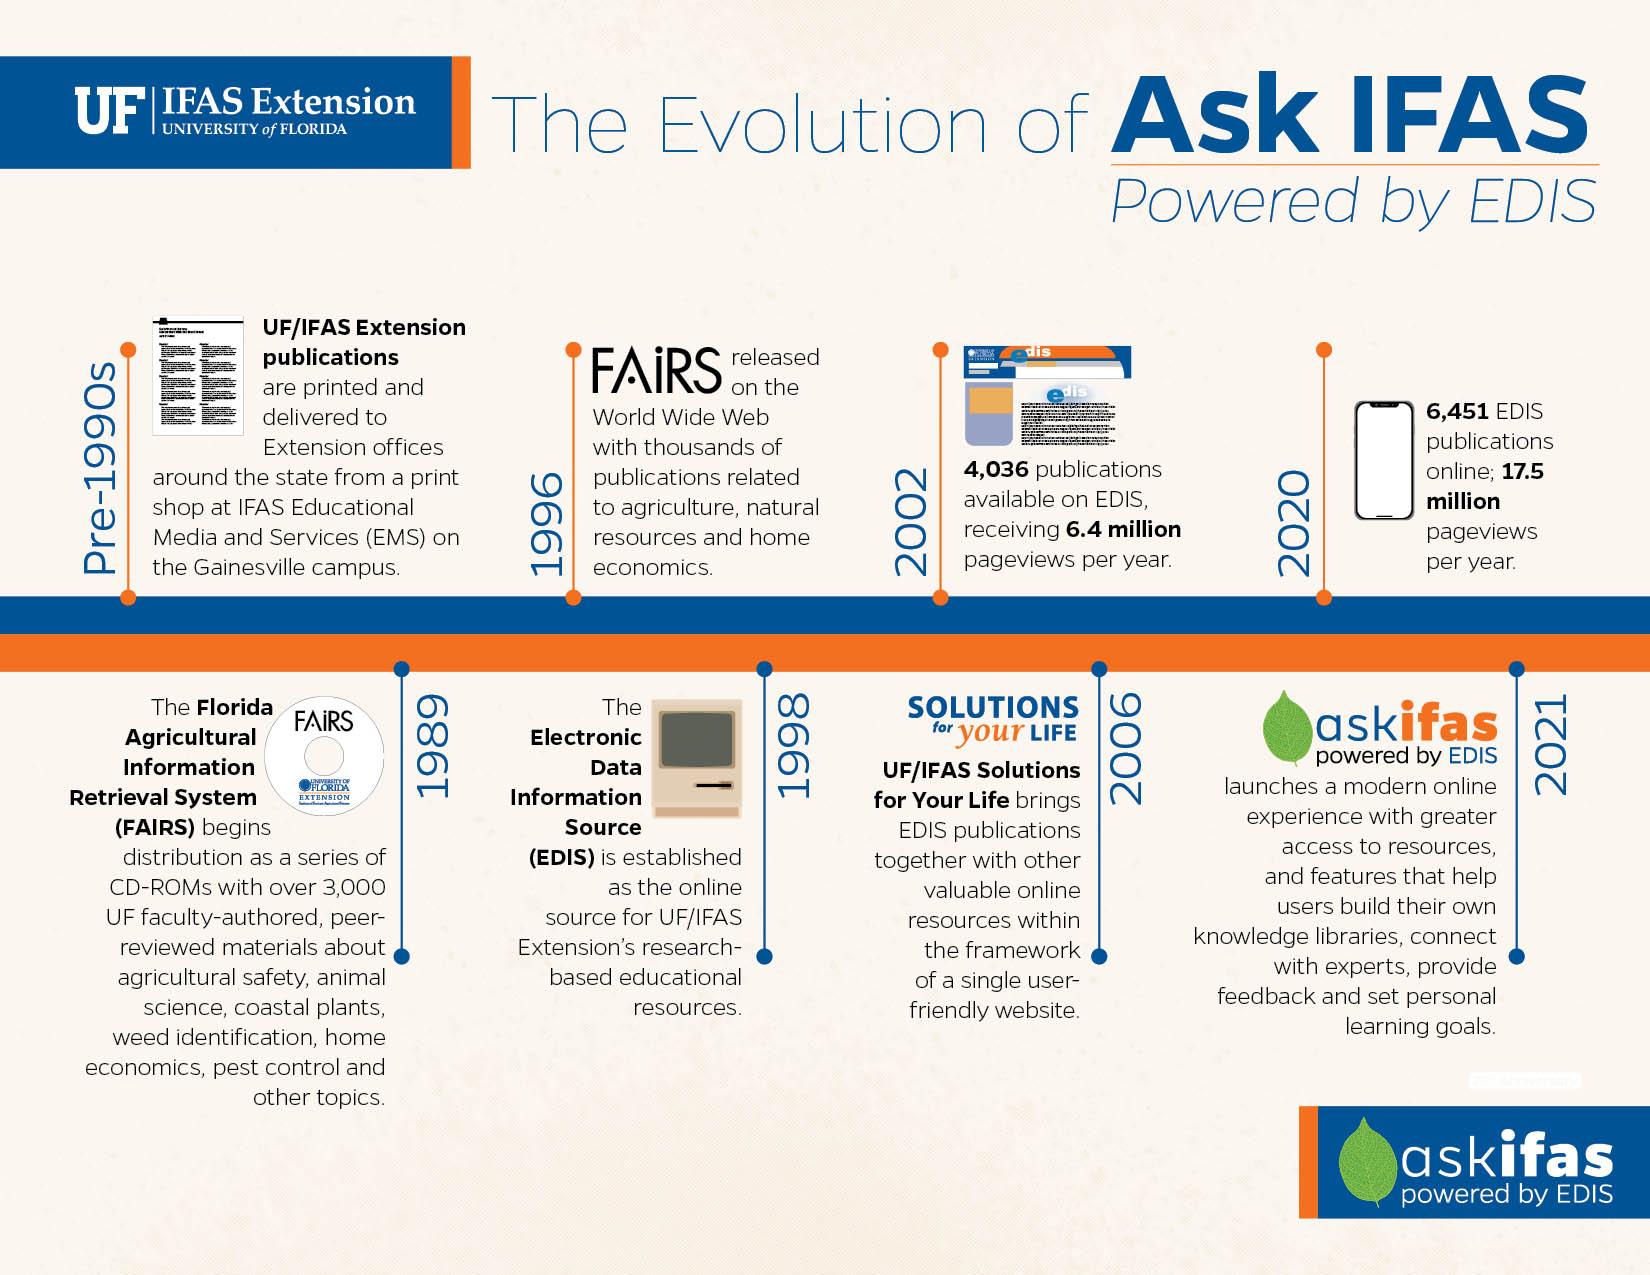 The Evolution of Ask IFAS